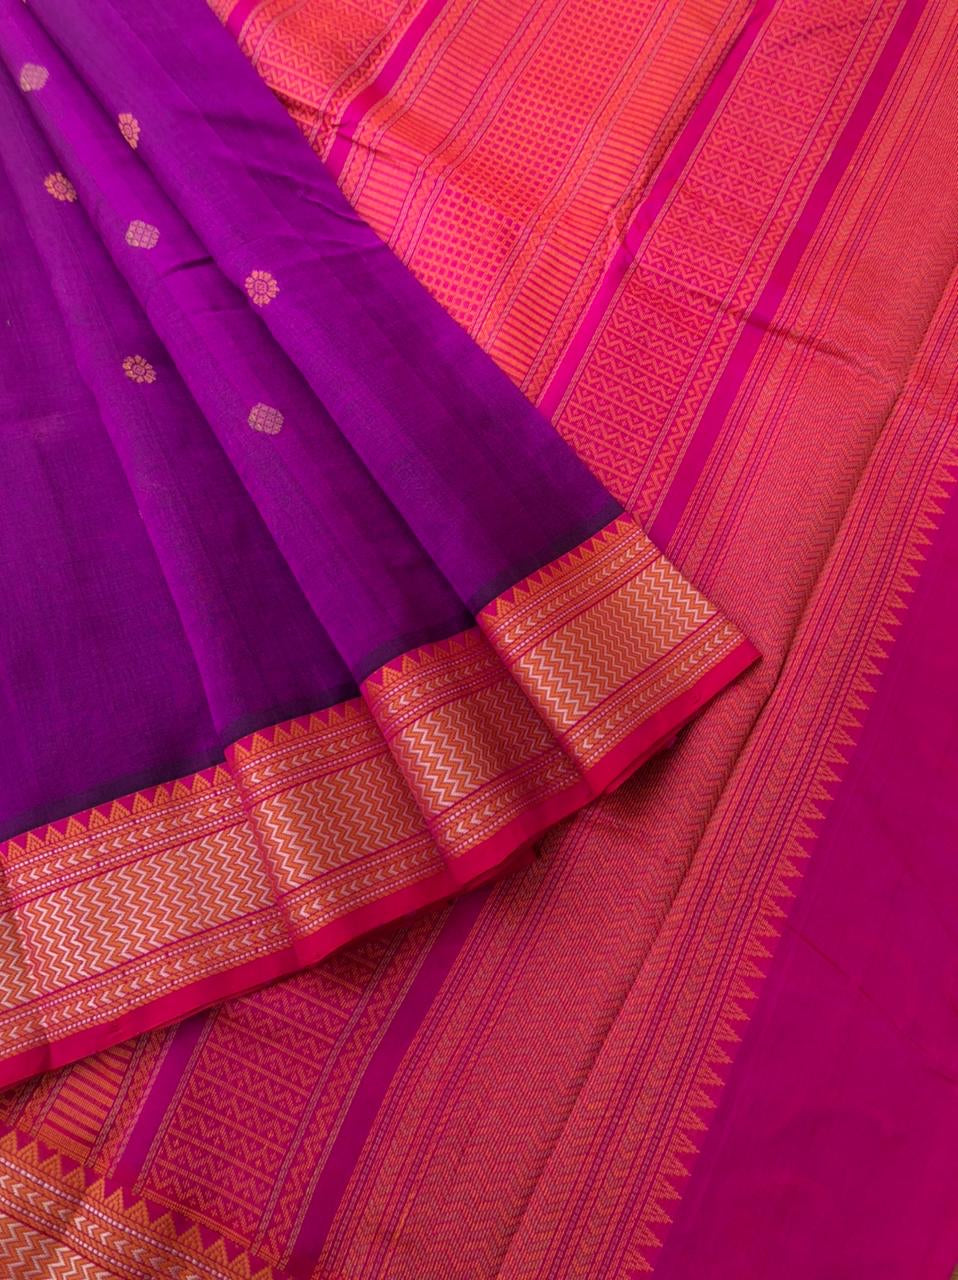 Woven Motifs Silk Cotton - purple pink with small thread woven borders